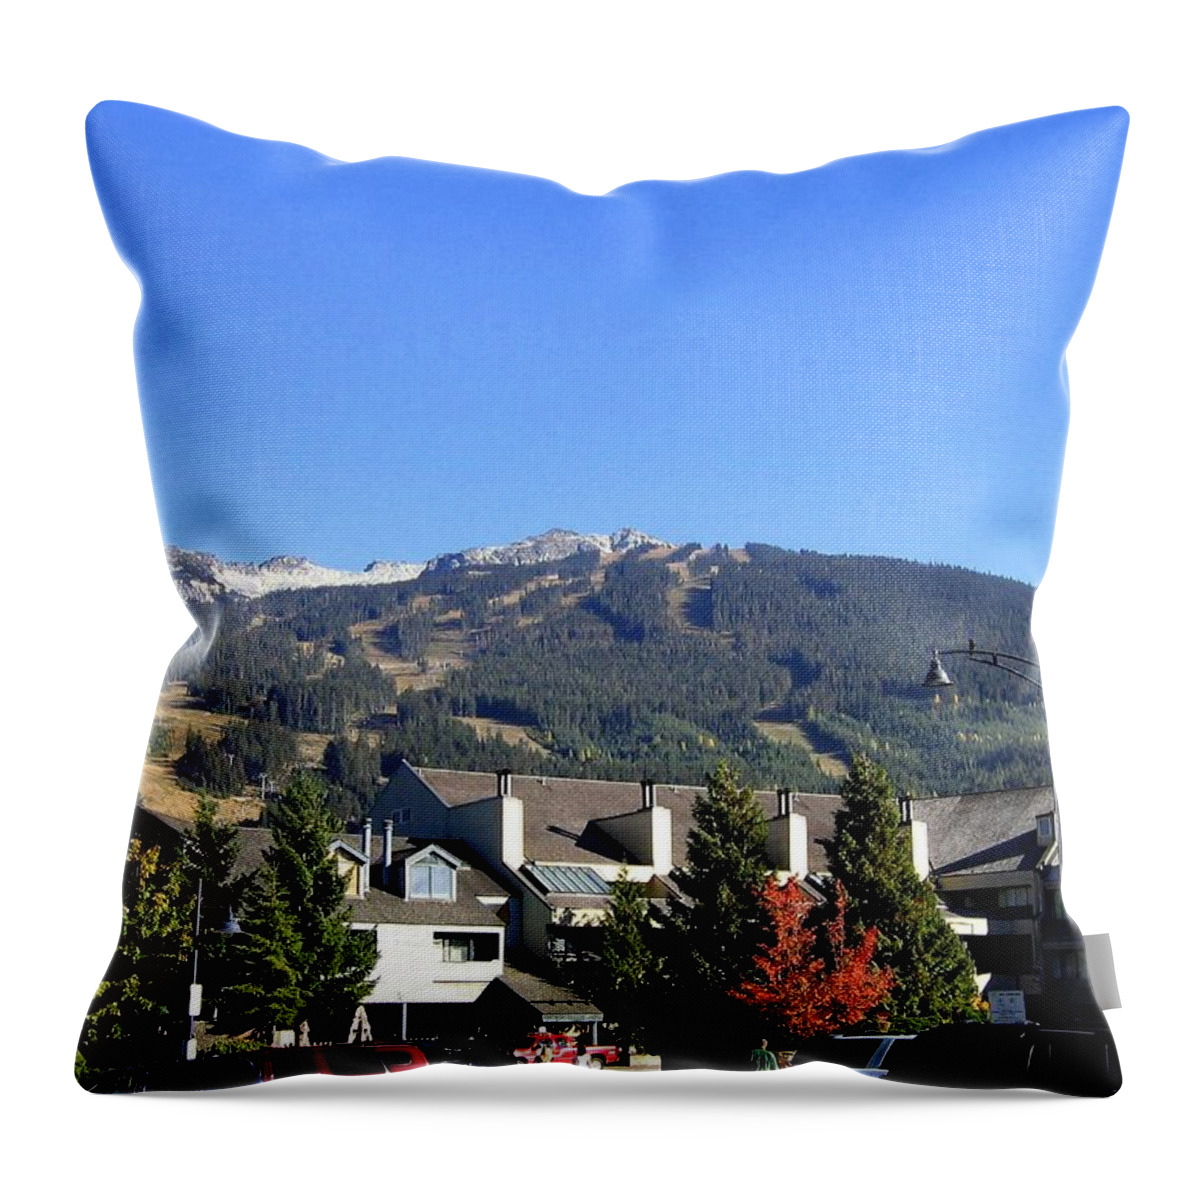 2010 Olympics Throw Pillow featuring the photograph Blackcomb Mountain by Will Borden